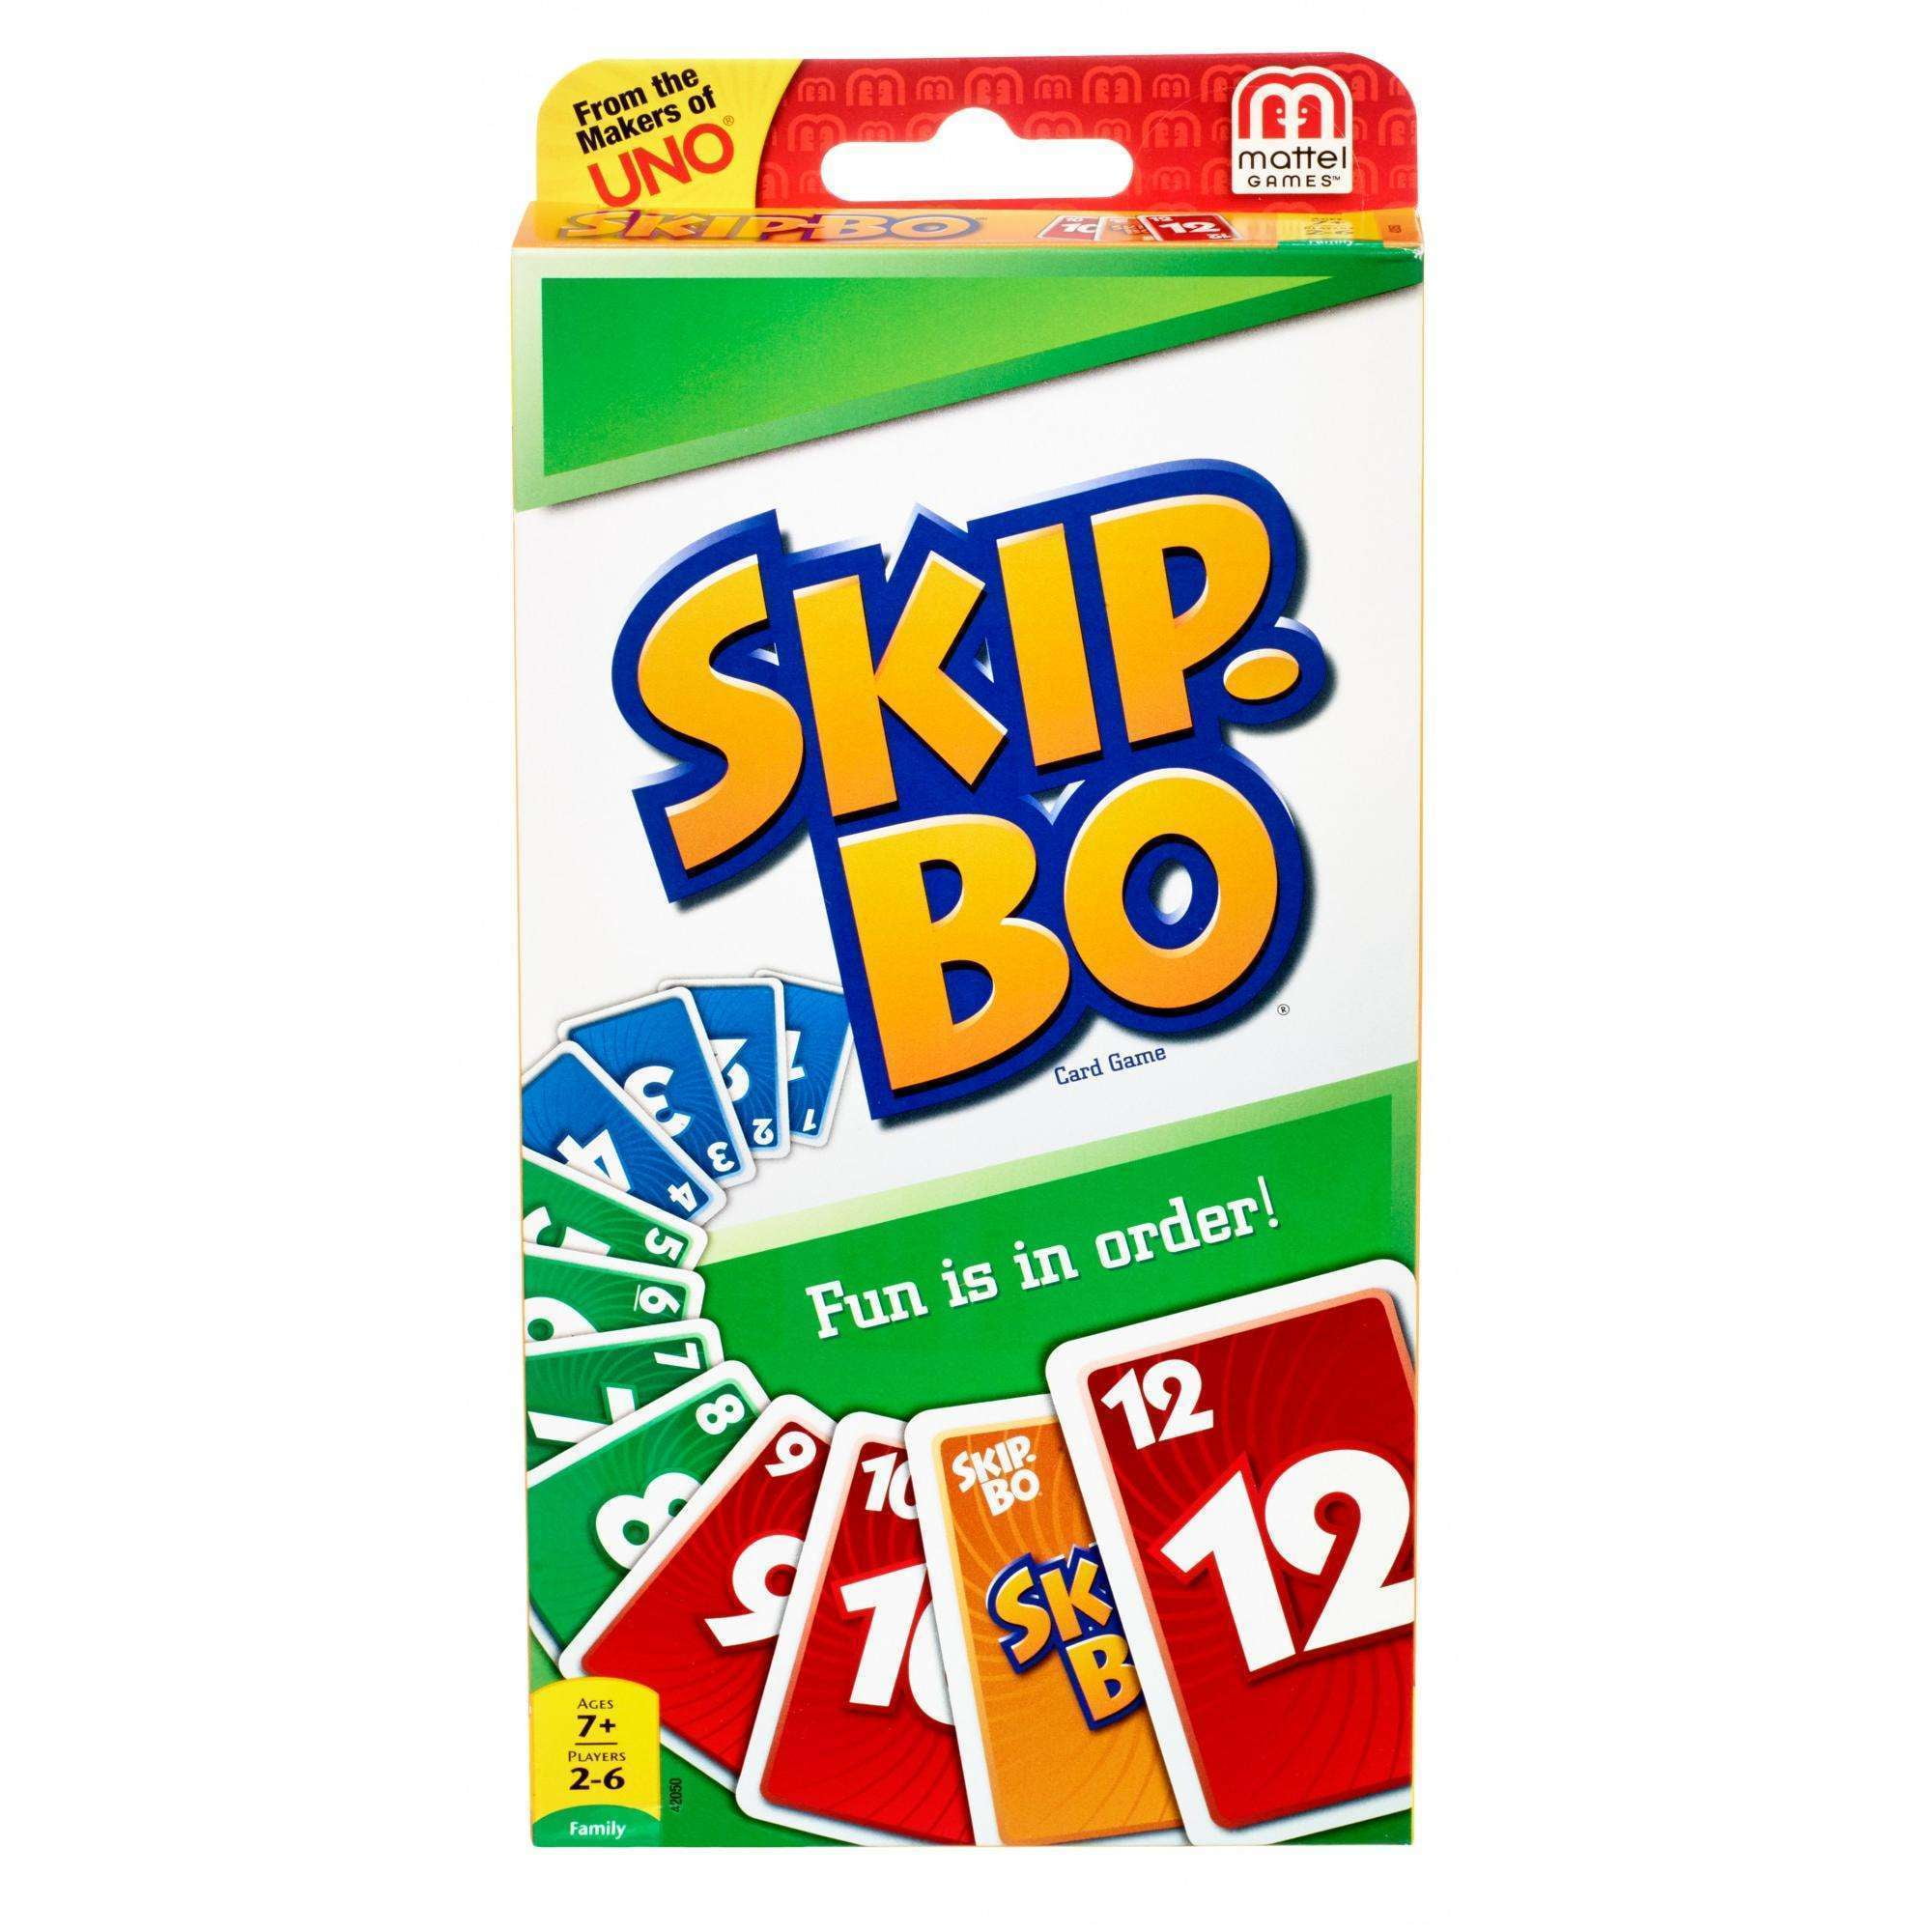 2 to 6 Players for sale online Mattel 42050 Skip-Bo Card Game